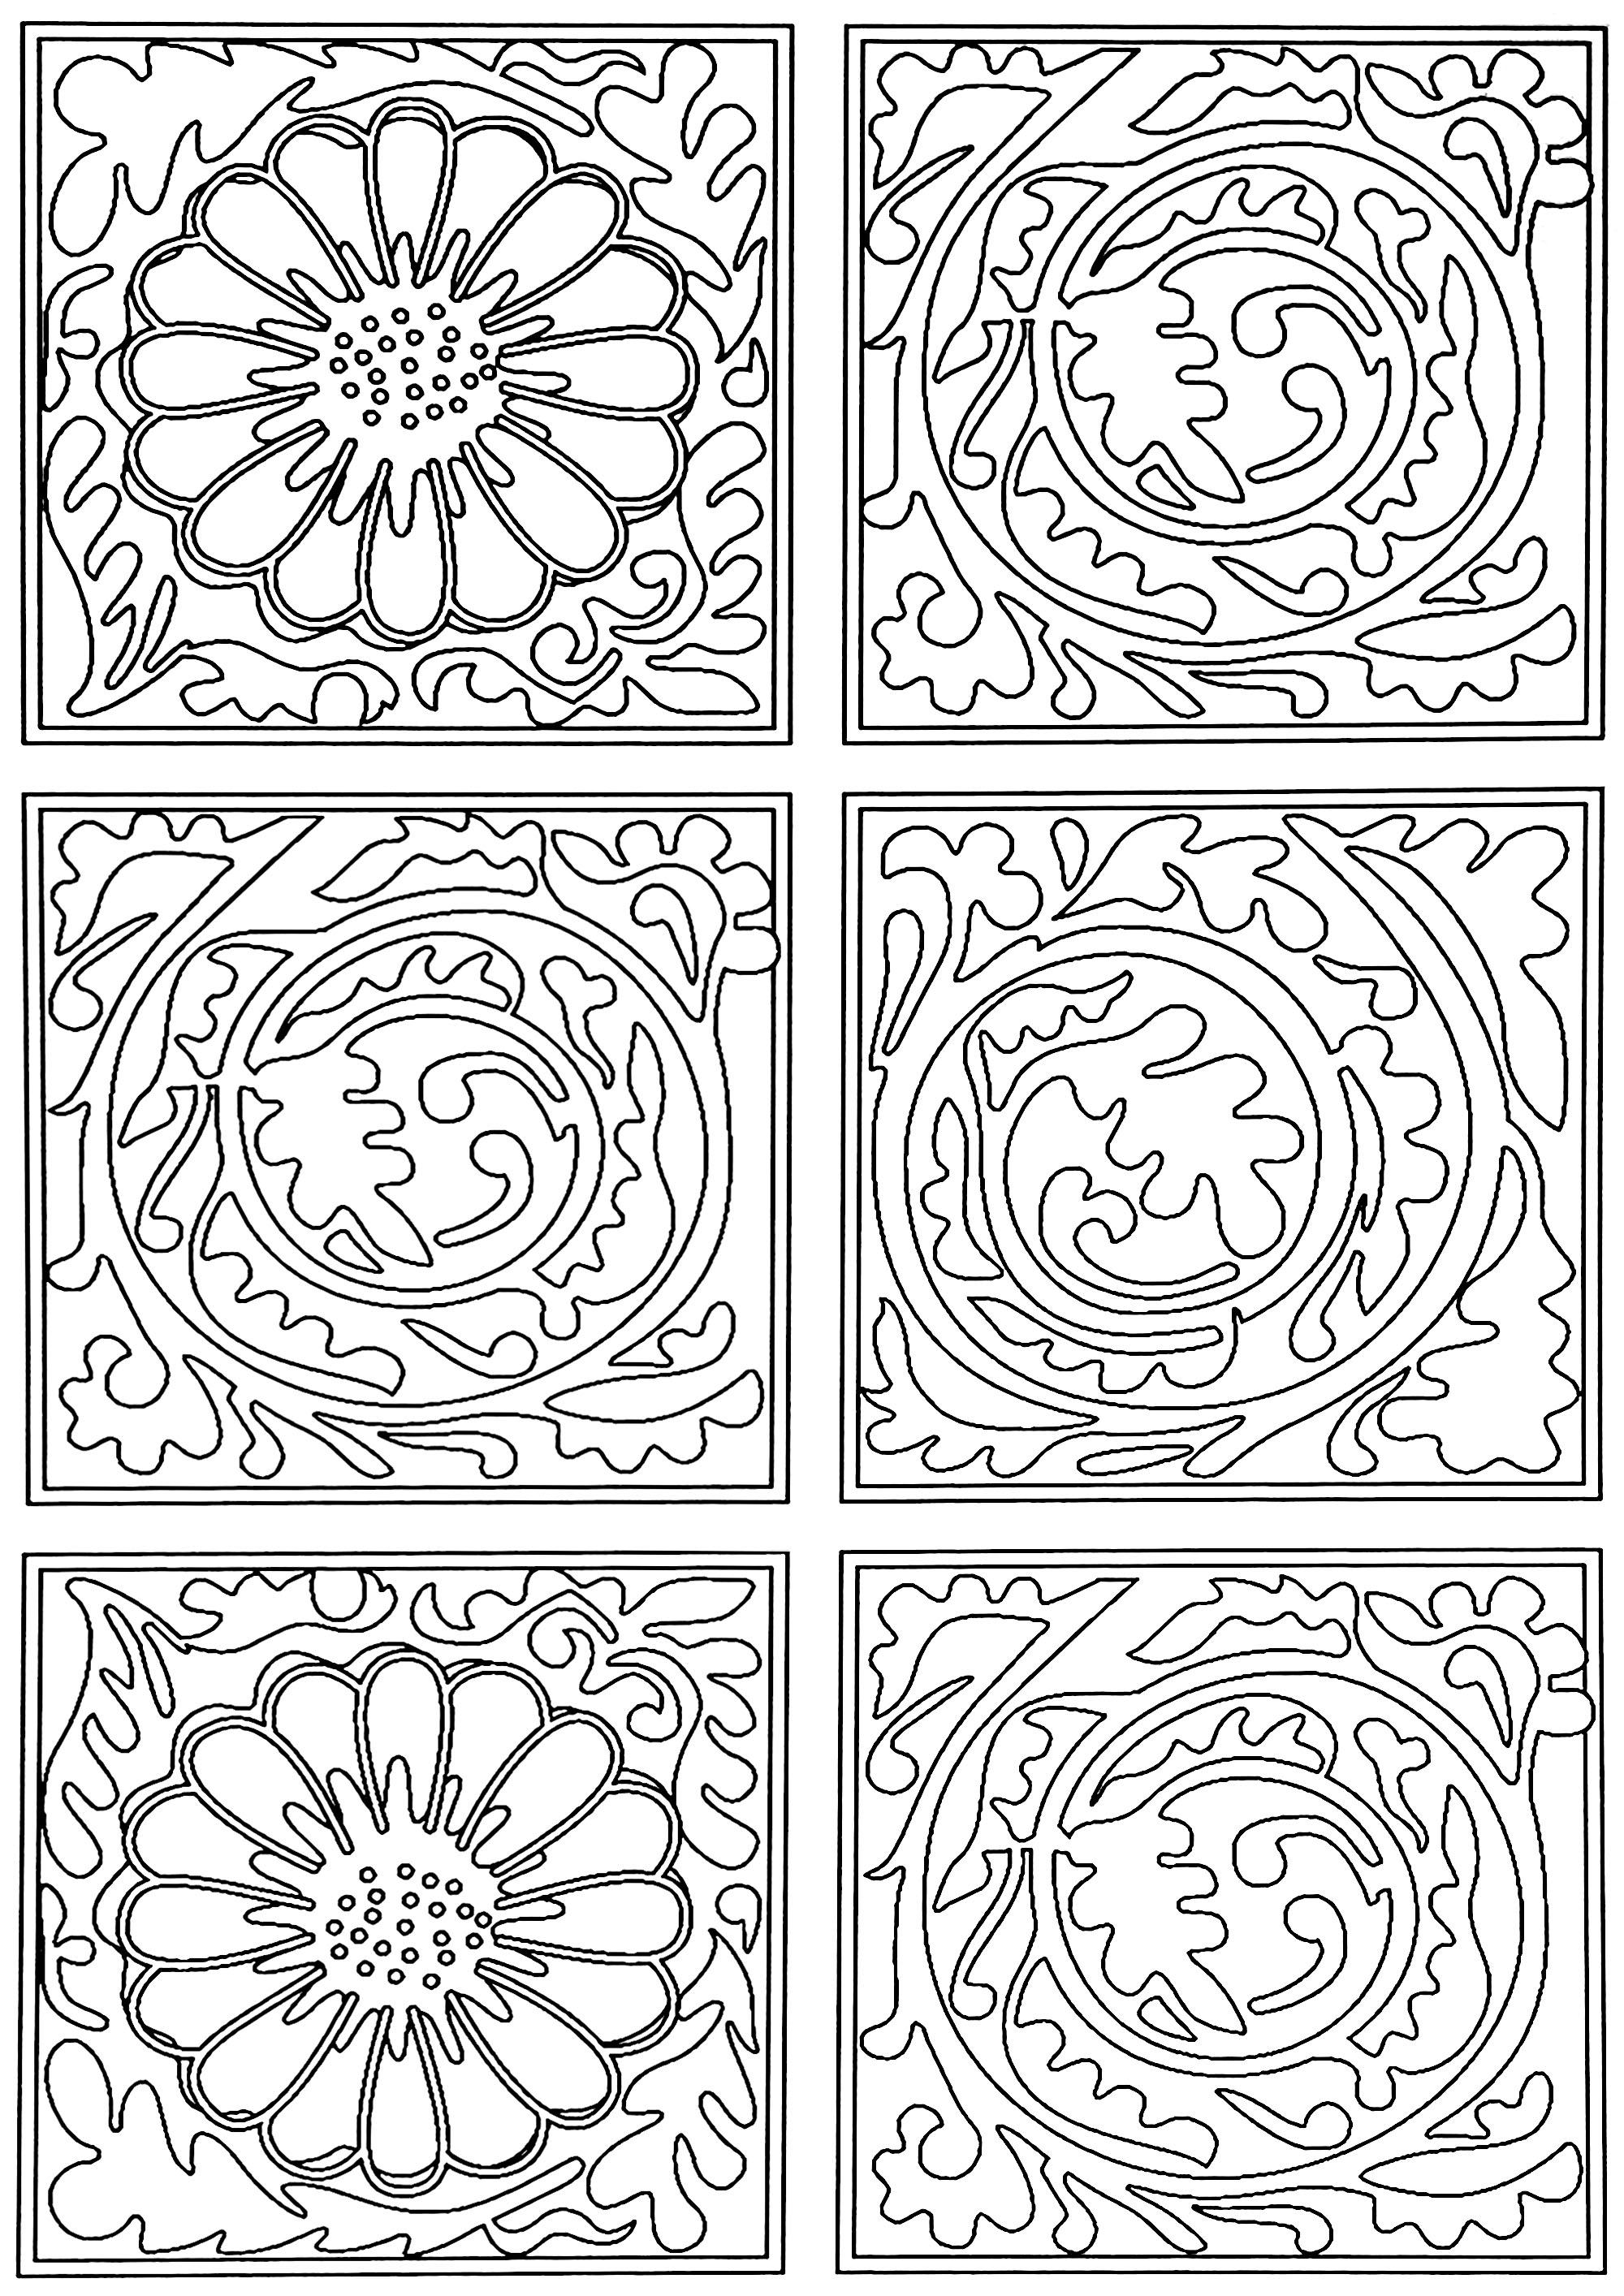 Coloring page created from the wallpaper pattern created by William Morris: 'Diaper' in 1870. This pattern is made of squares containing leaf scrolls, interspersed with squares containing flowers